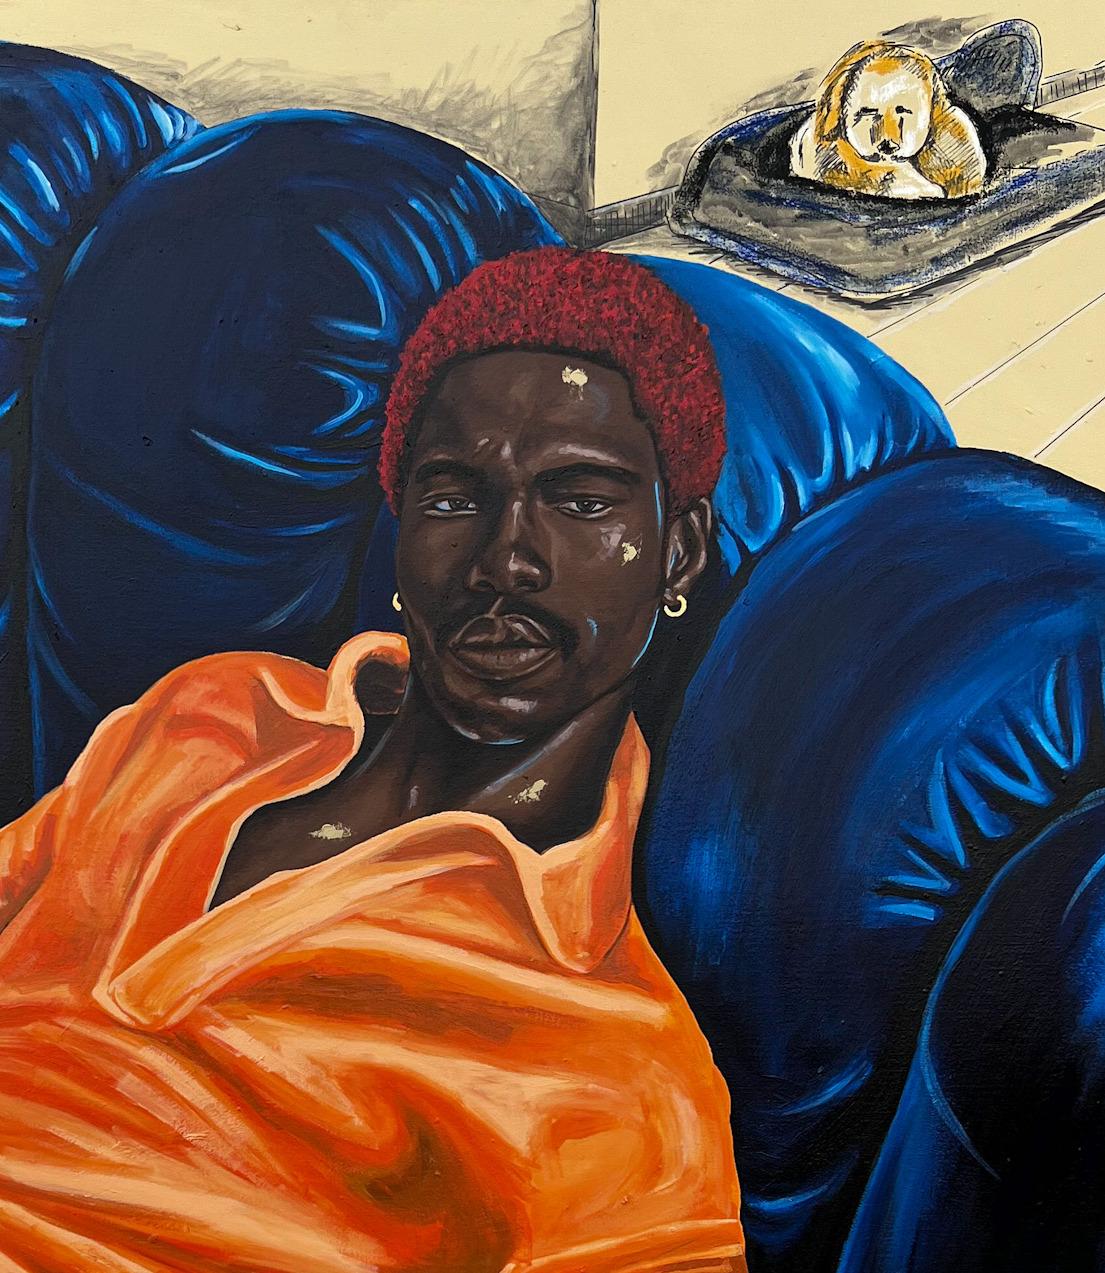 Comfortable Within - Photorealist Painting by Eyitayo Alagbe 